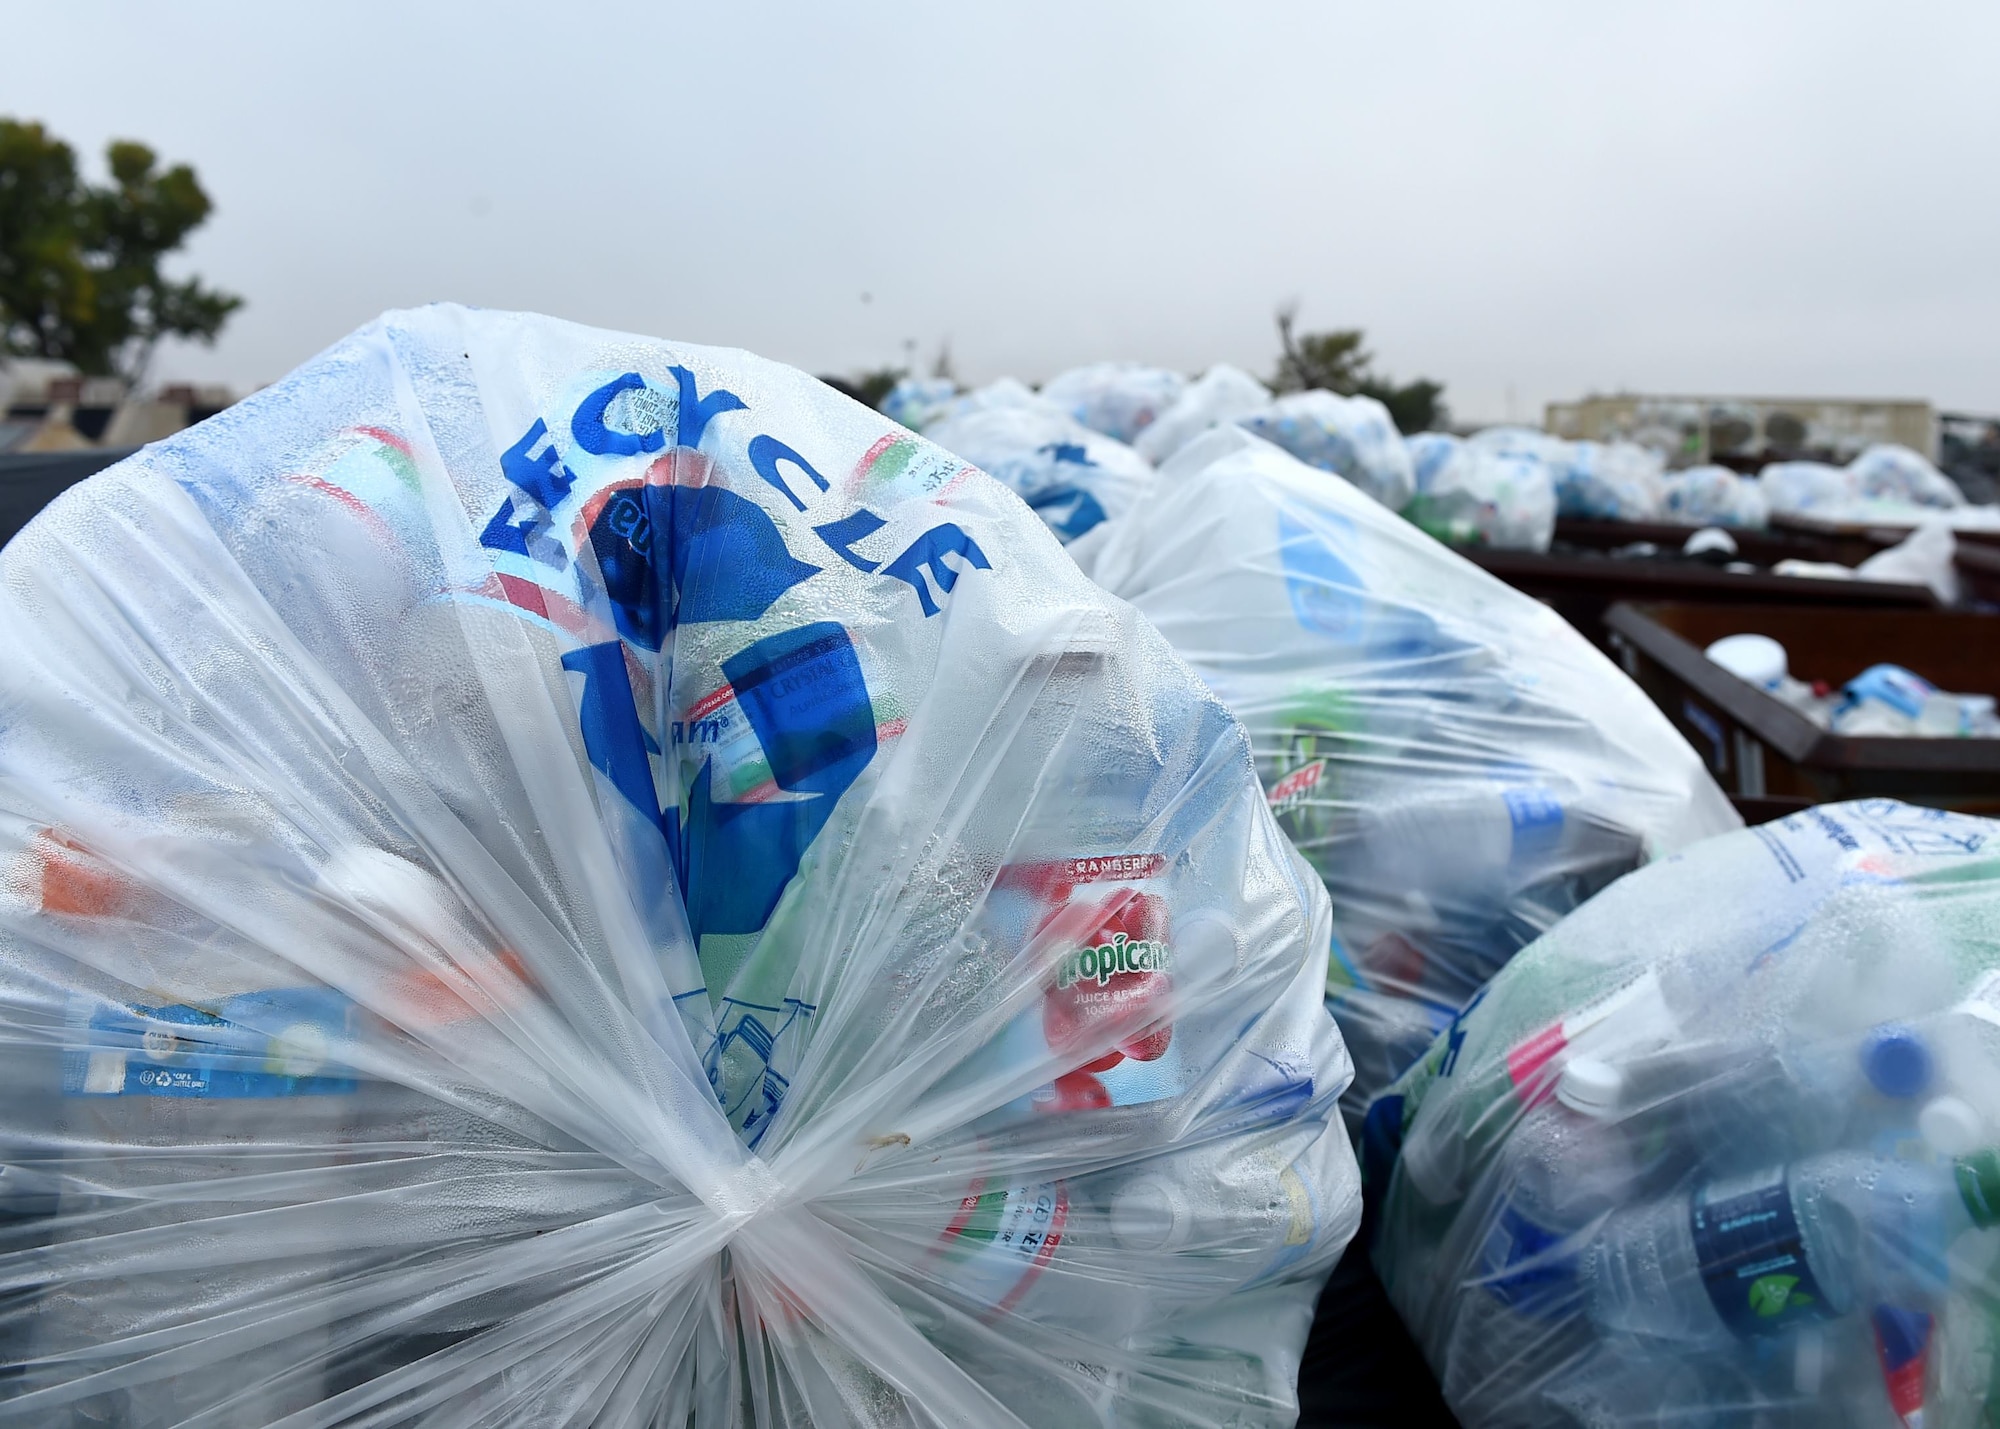 Bags full of plastic bottles sit at the Altus Air Force Base recycling center, Nov. 10, 2015. Recycling helps reduce the amount of natural resources being used for creating products such as paper, plastic and other materials that people use daily. (U.S. Air Force photo by Senior Airman Franklin R. Ramos/Released)